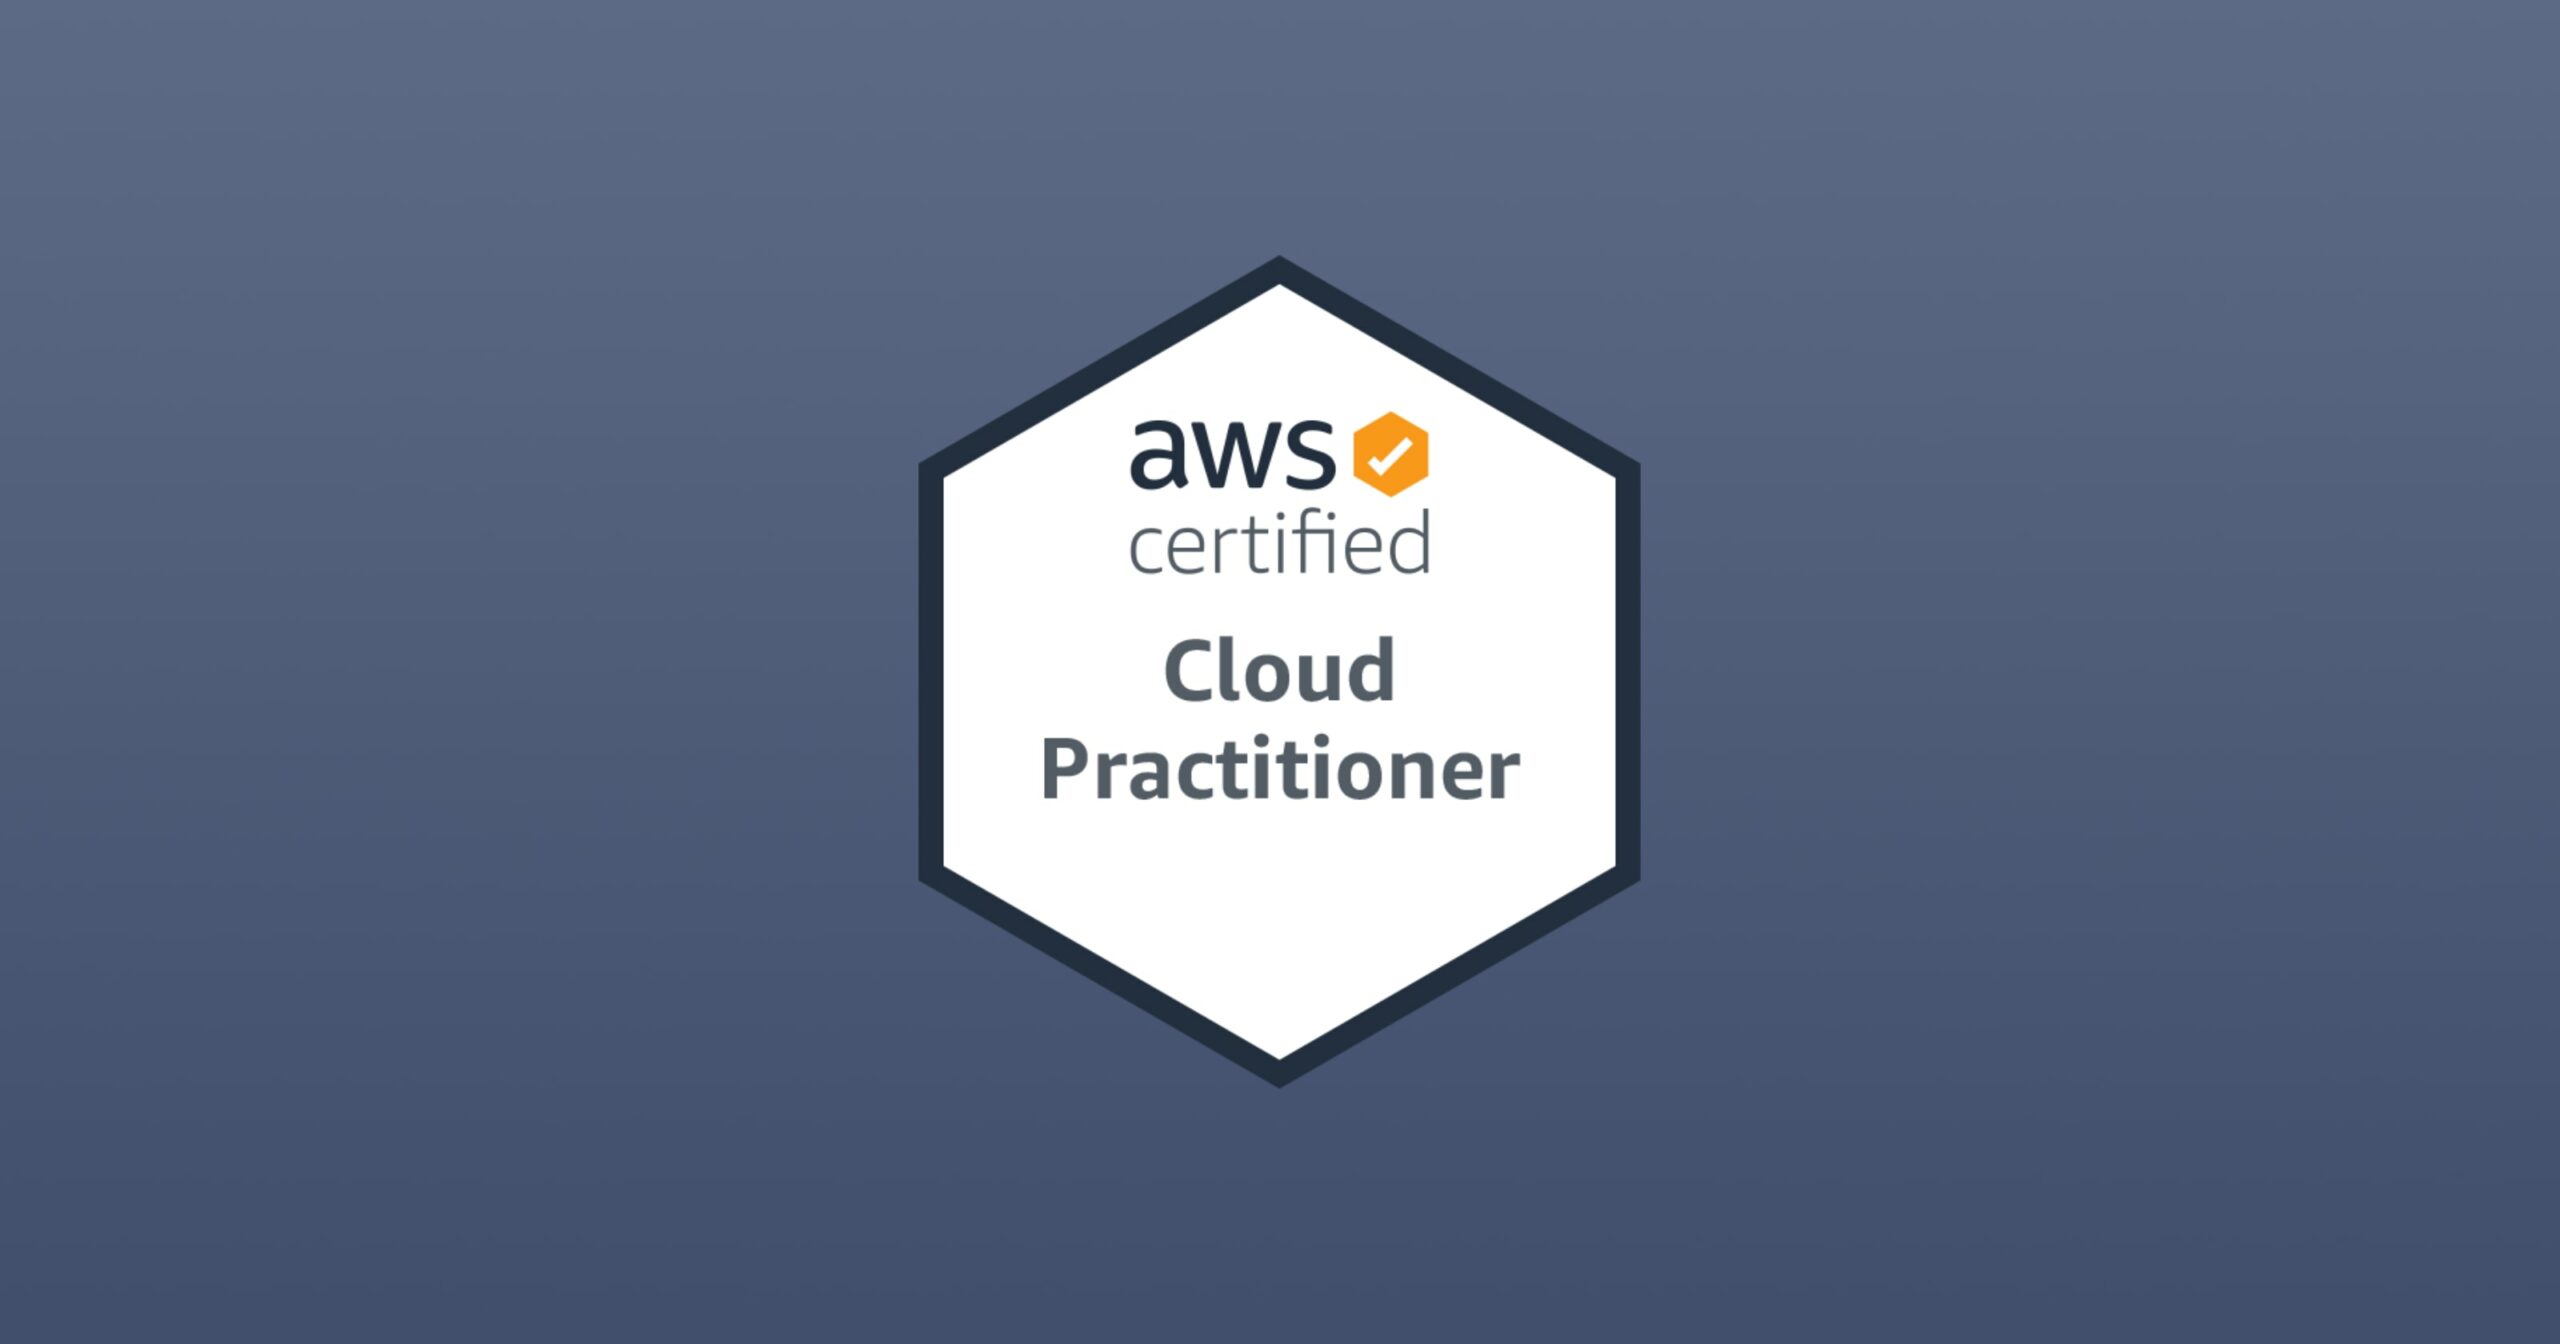 AWS-CLF – AWS Certified Cloud Practitioner